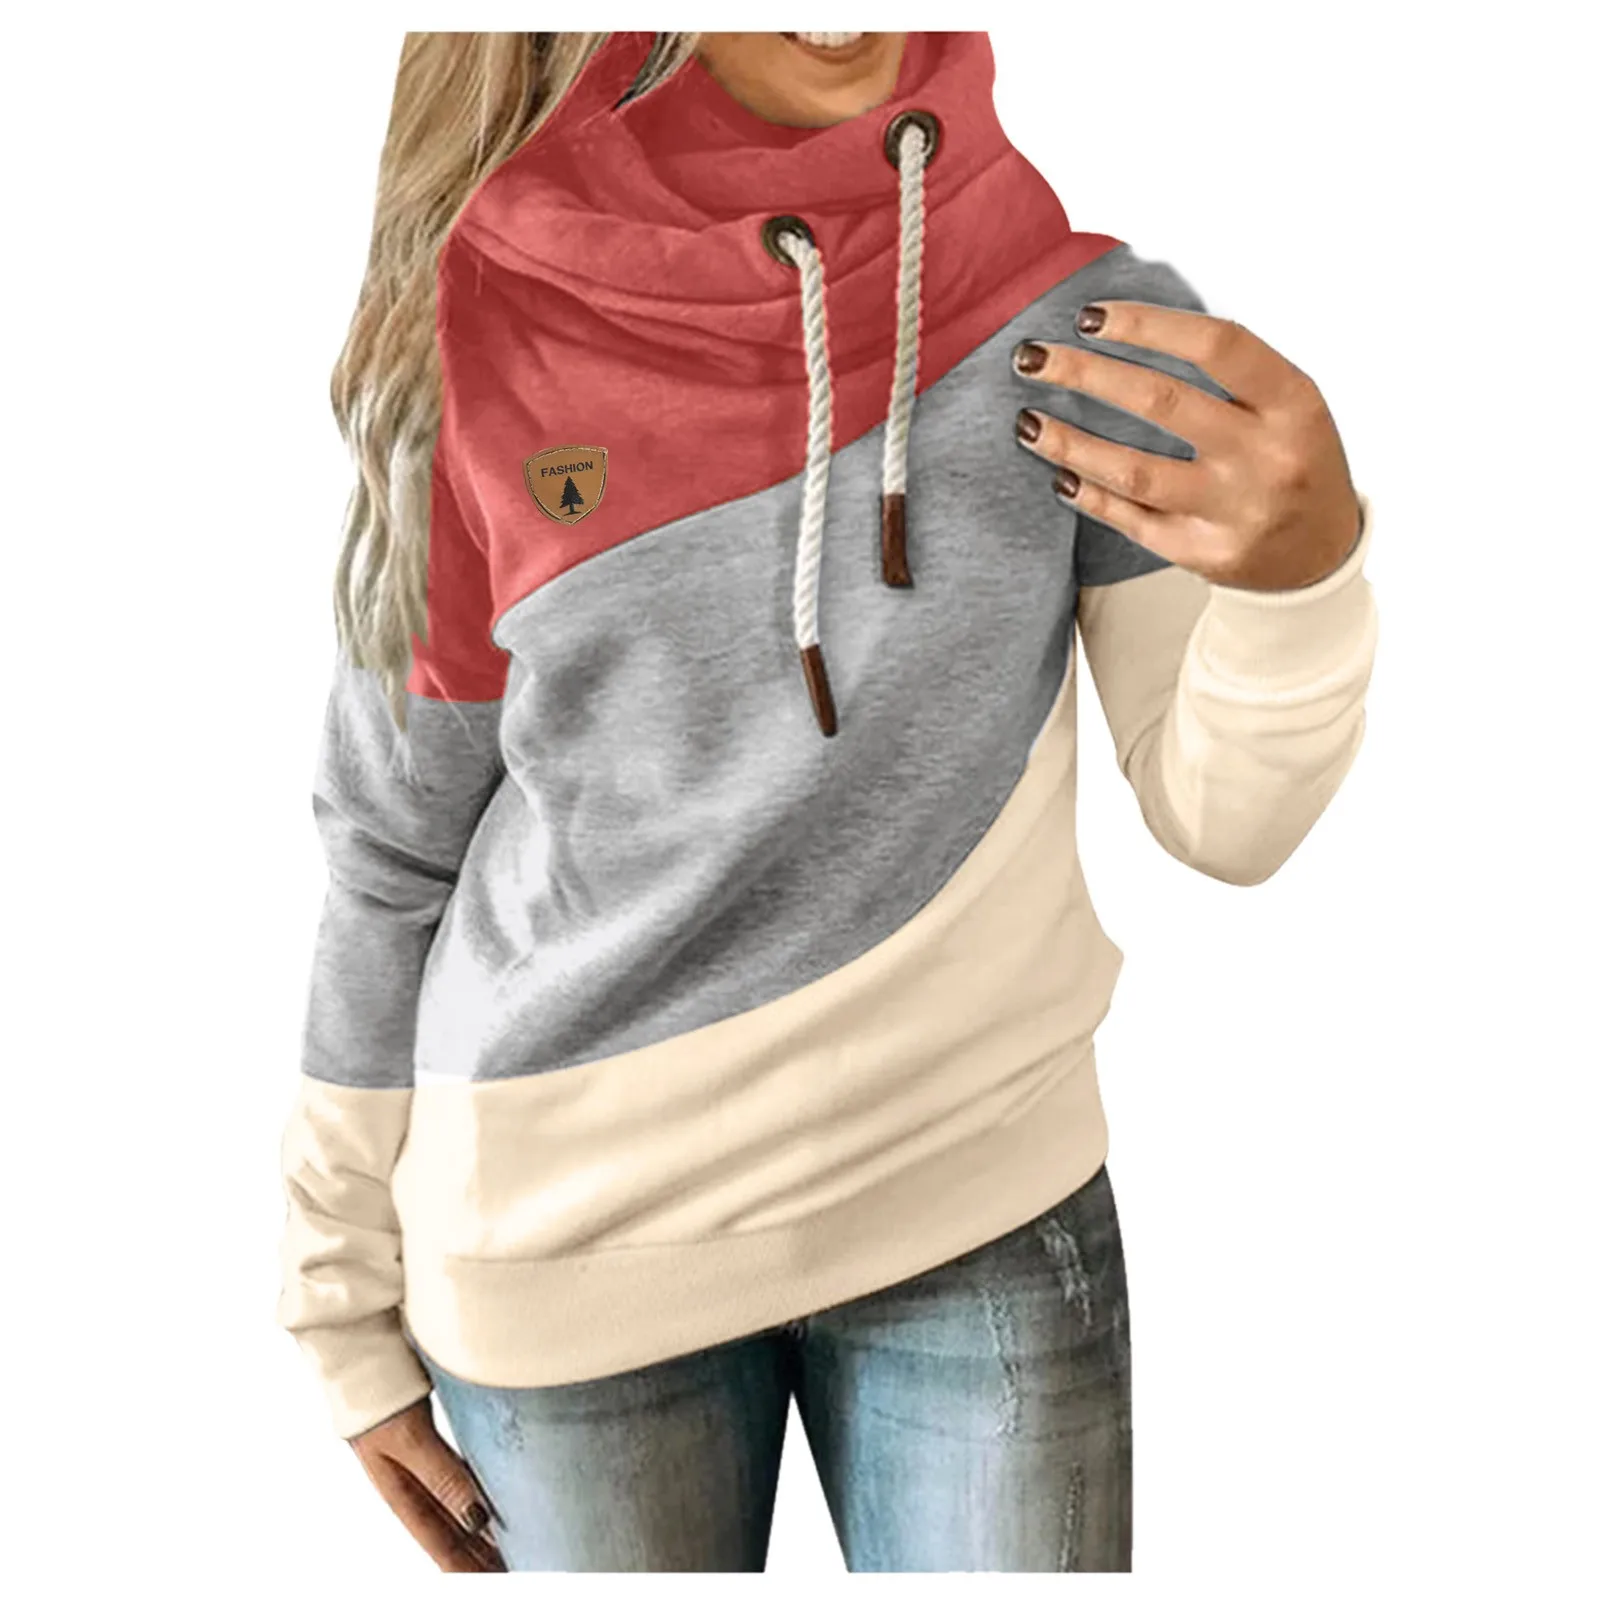 oversized hoodie Autumn Winter Female Casual Fashion Solid Contrast Splice Long Sleeve Hoodie Sweatshirt Strap Loose sudaderas con capucha D911# sweatshirts for girls Hoodies & Sweatshirts